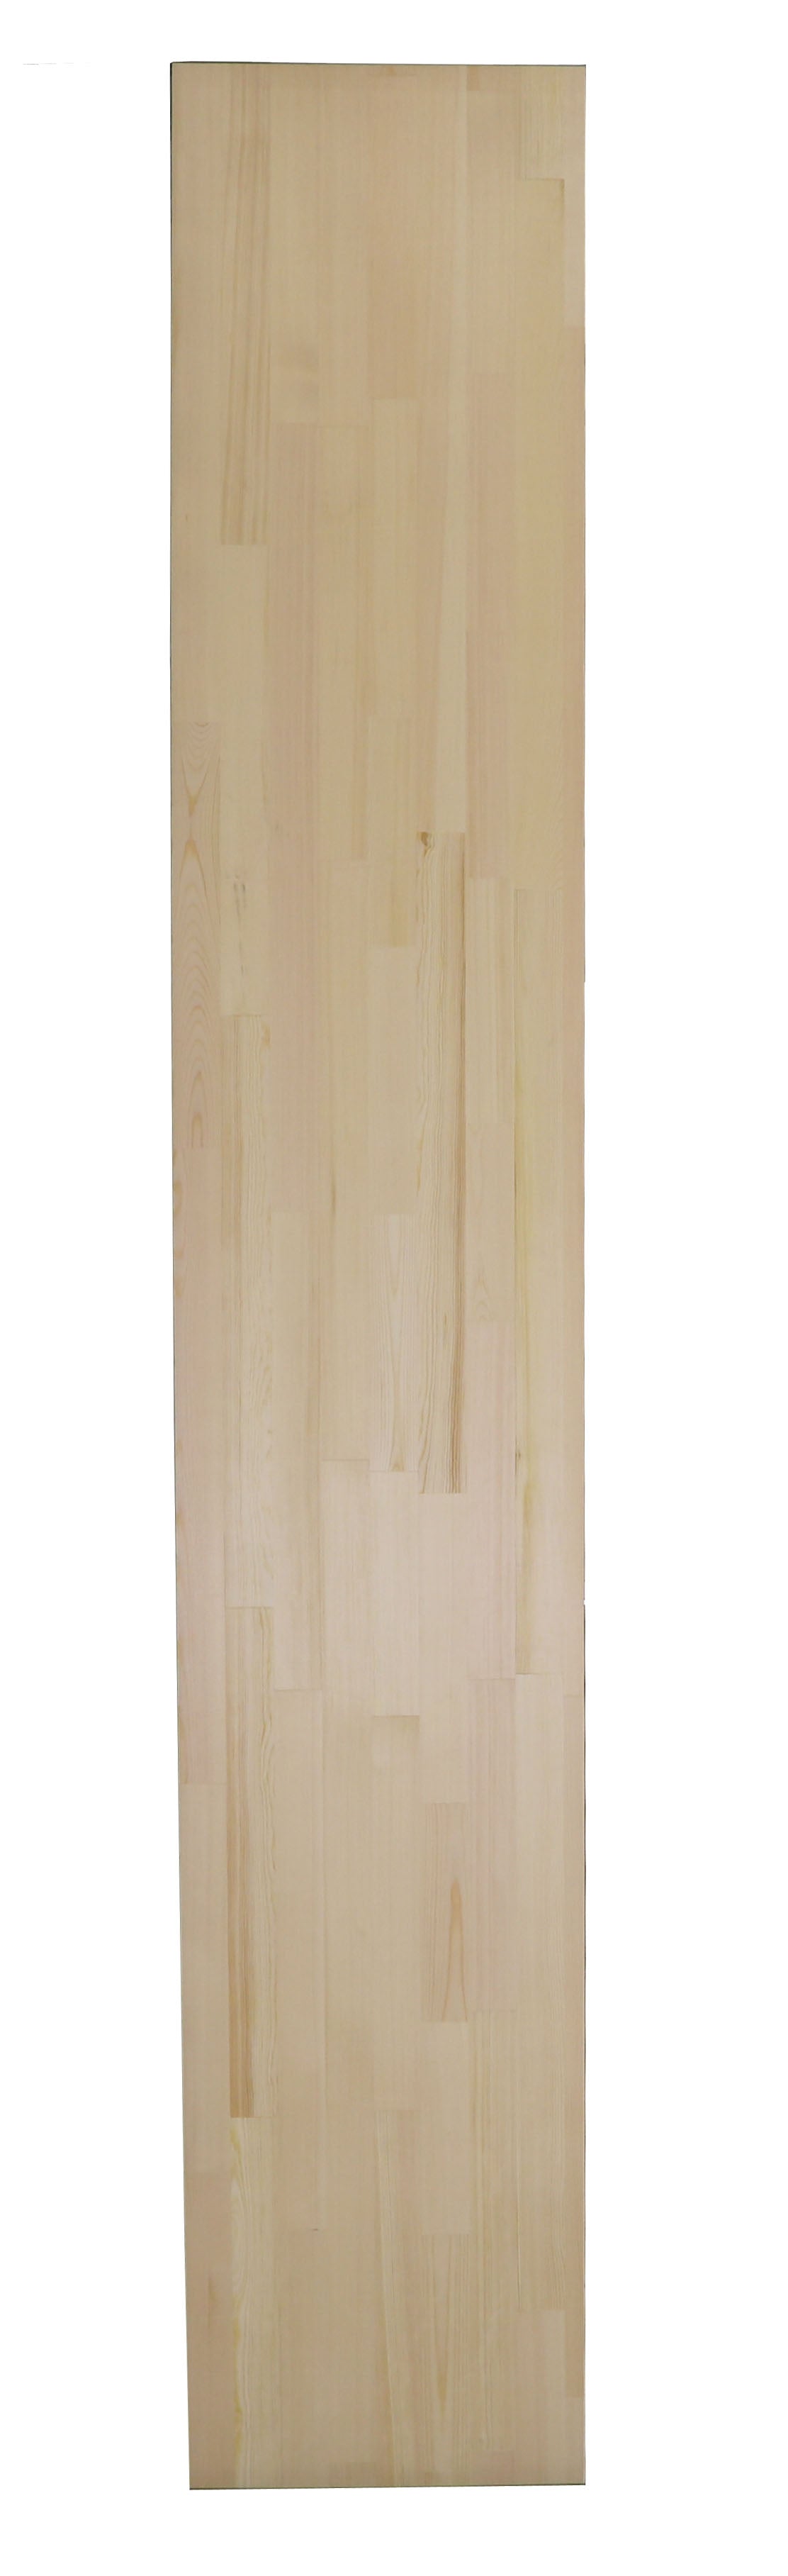 Solid Wood Board - Finger Joint Pine Scot/Red  -  Grade AA - Unfinished 3/4" x 12" x 8'